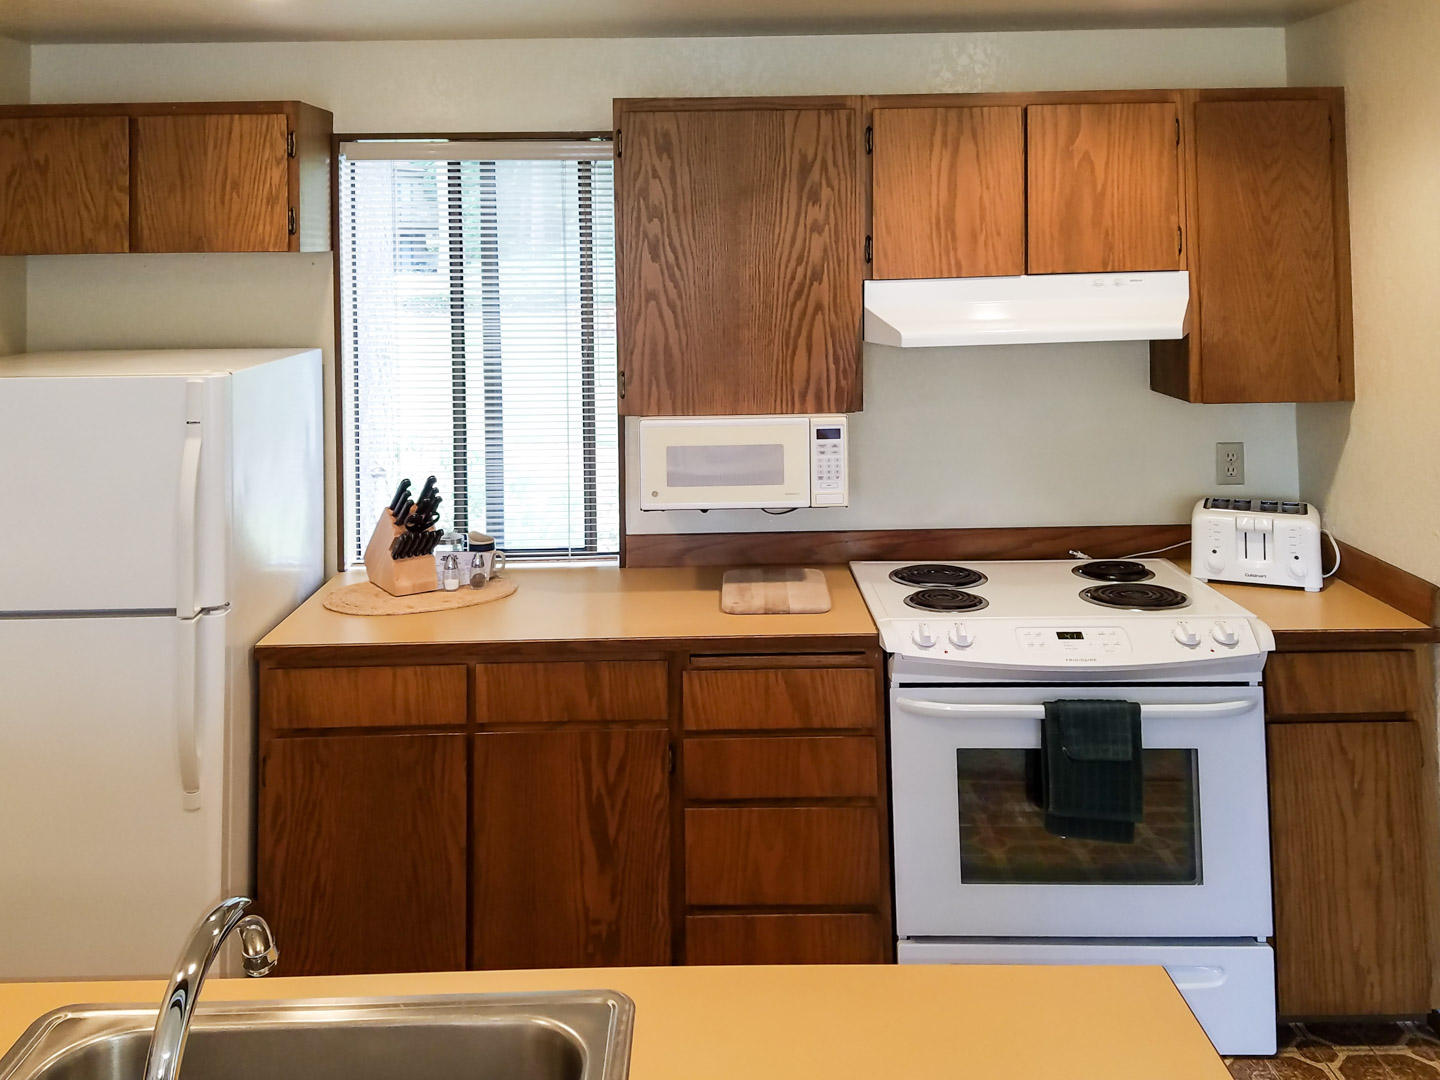 A fully equipped kitchen at VRI's Kala Point Village in Port Townsend, Washington.